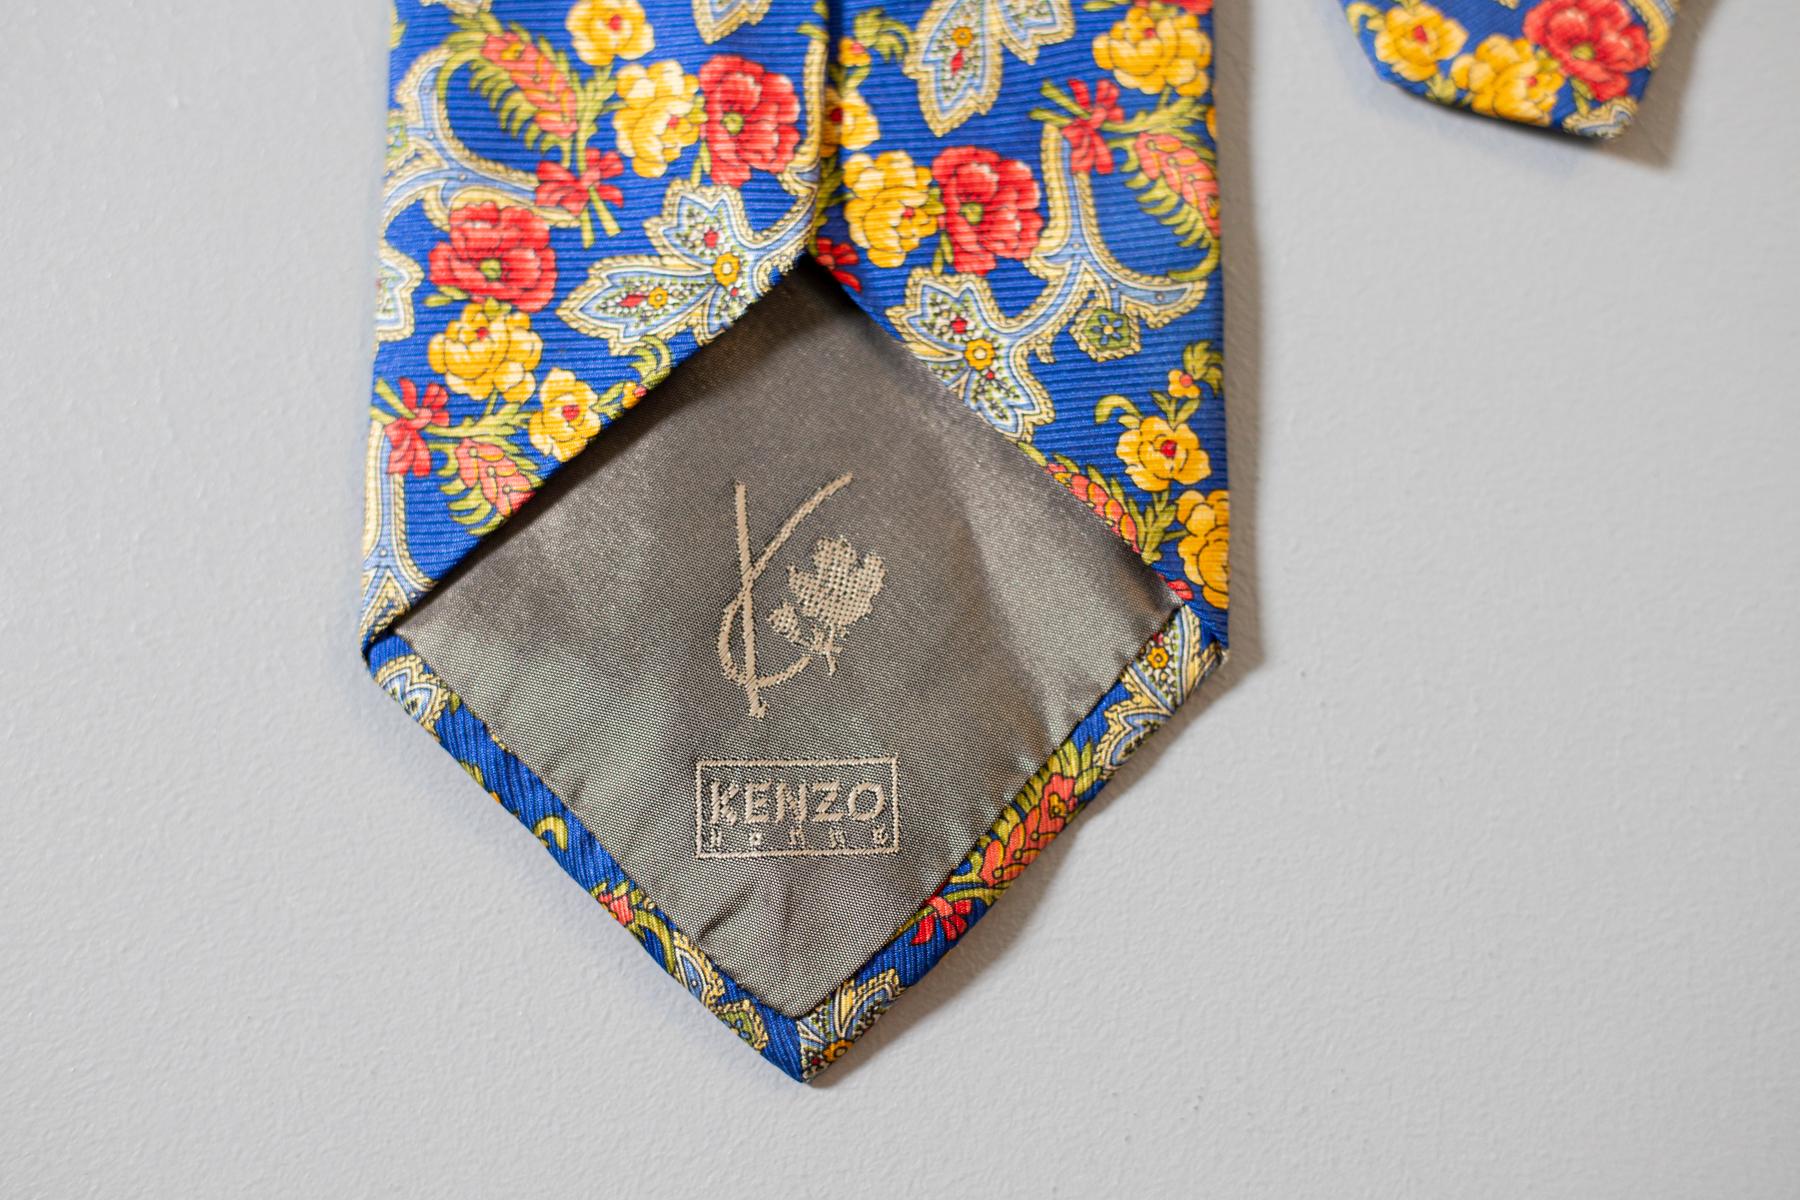 This vintage tie designed by Kenzo for his Kenzo Homme collection. This tie is in all-silk and is colourful: it displays coloured flowers on a blue background. unique and original, it is perfect for an elegant occasion.